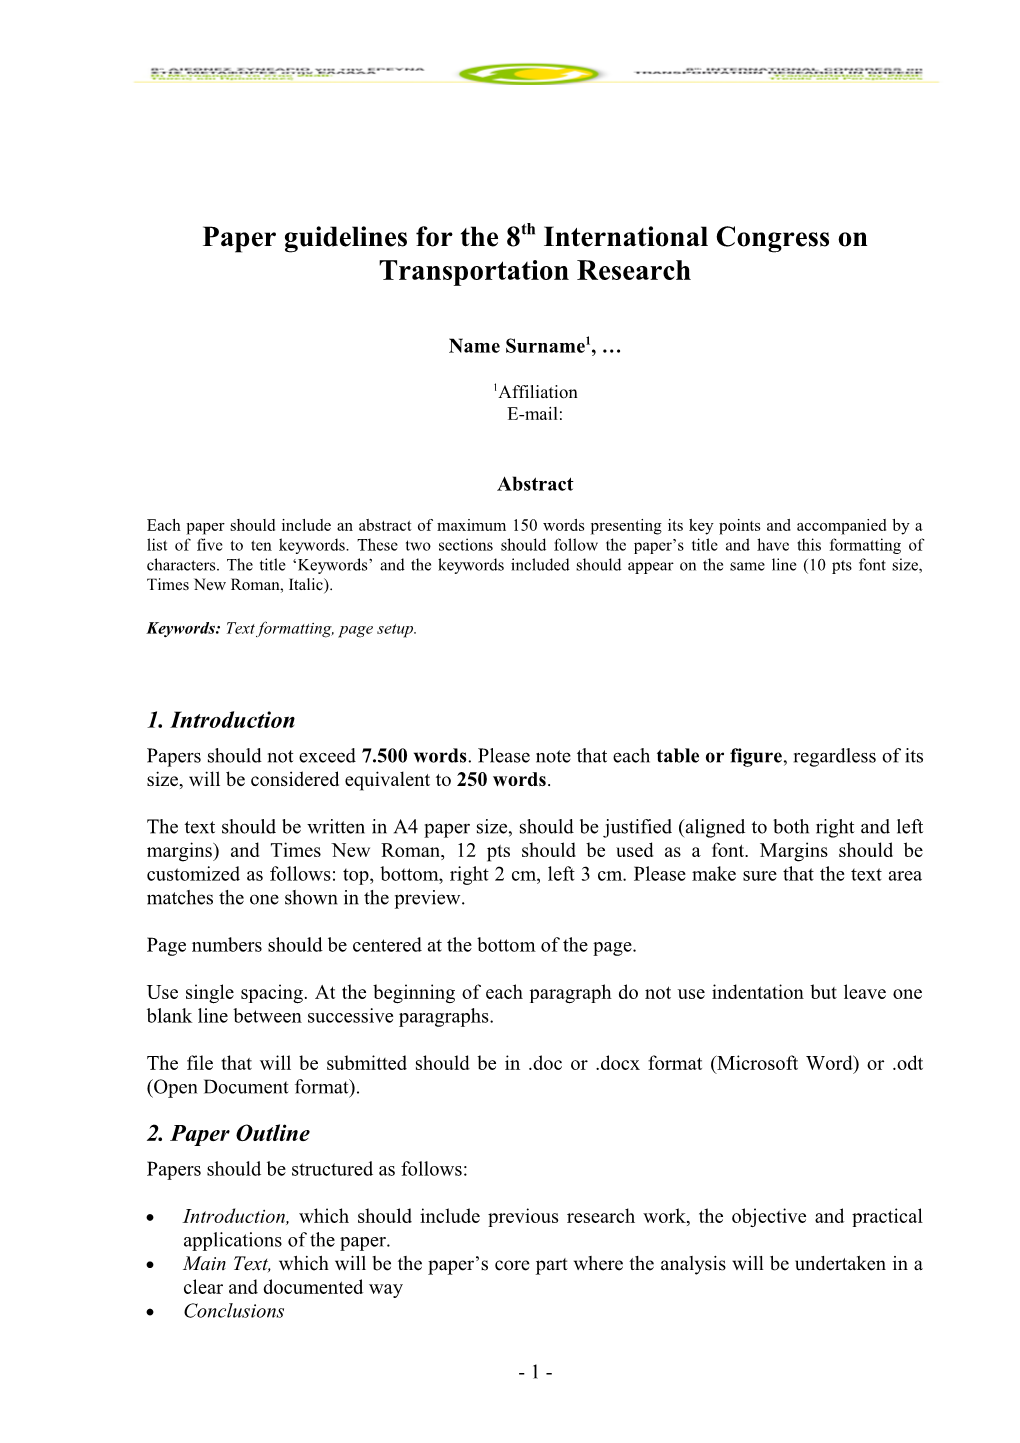 Paper Guidelines for the 8Th International Congress on Transportation Research